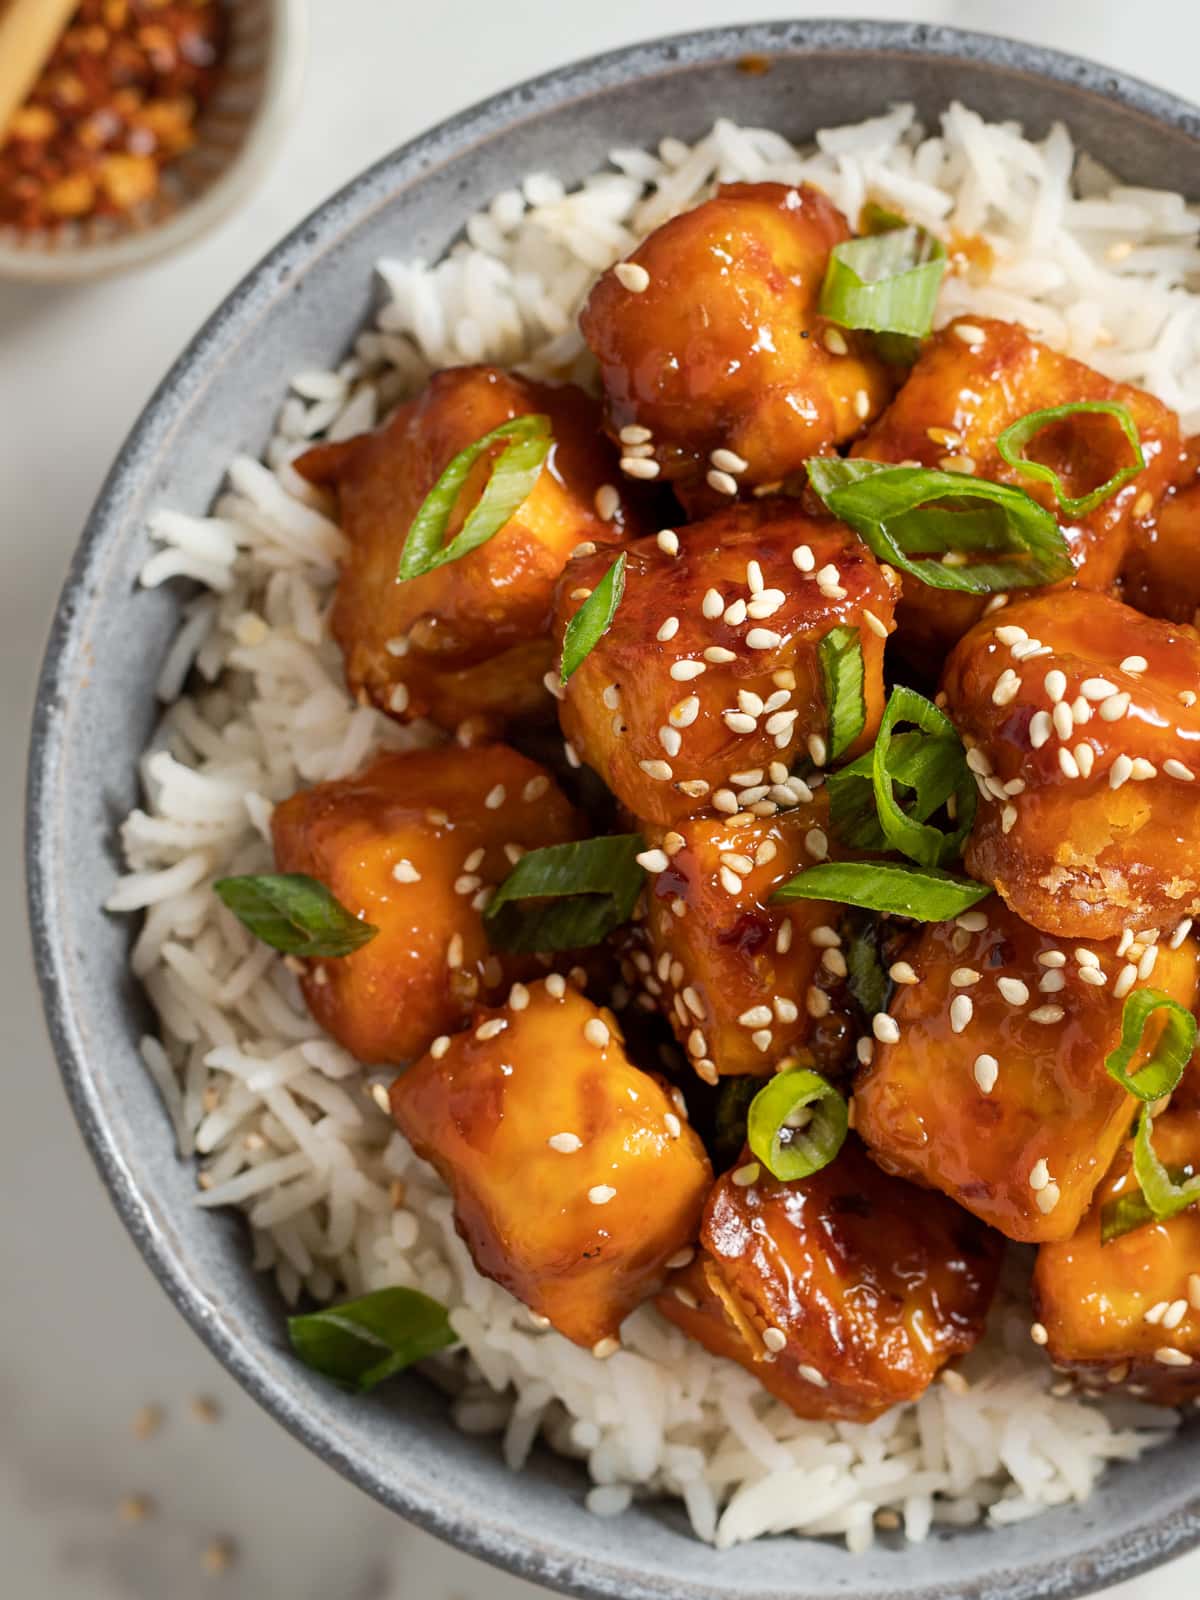 Bowlful of teriyaki tofu on a bed of rice topped with sesame seeds and green onions.